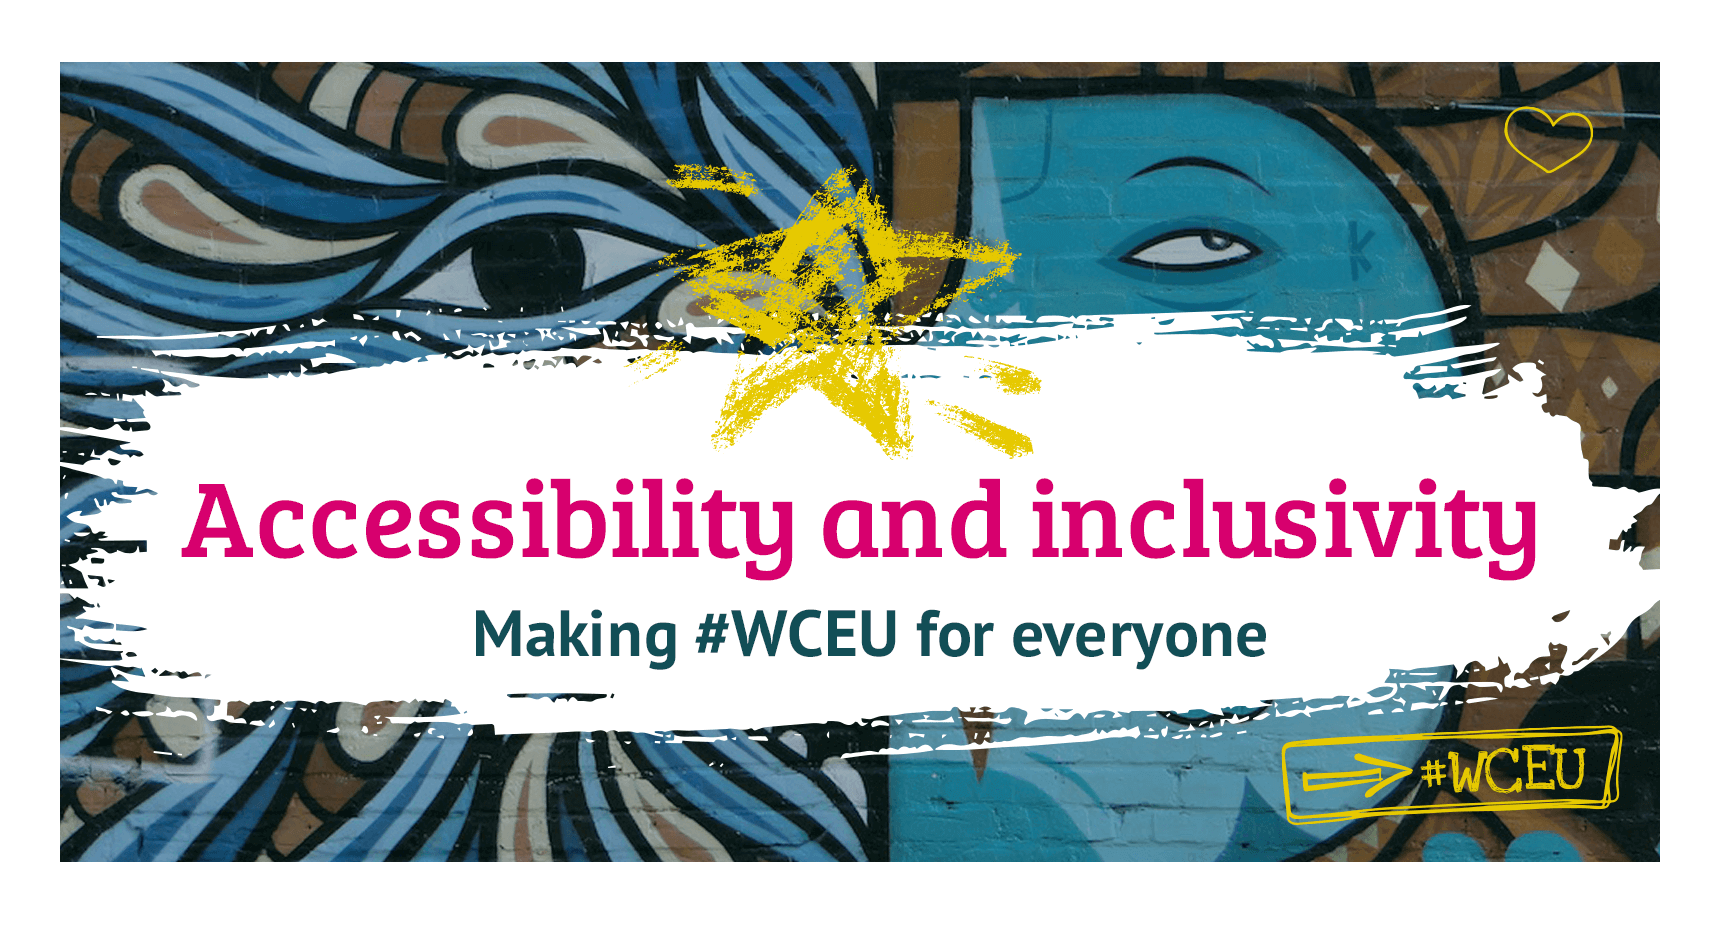 The WordCamp Europe 2019 Accessibility and Inclusivity page.